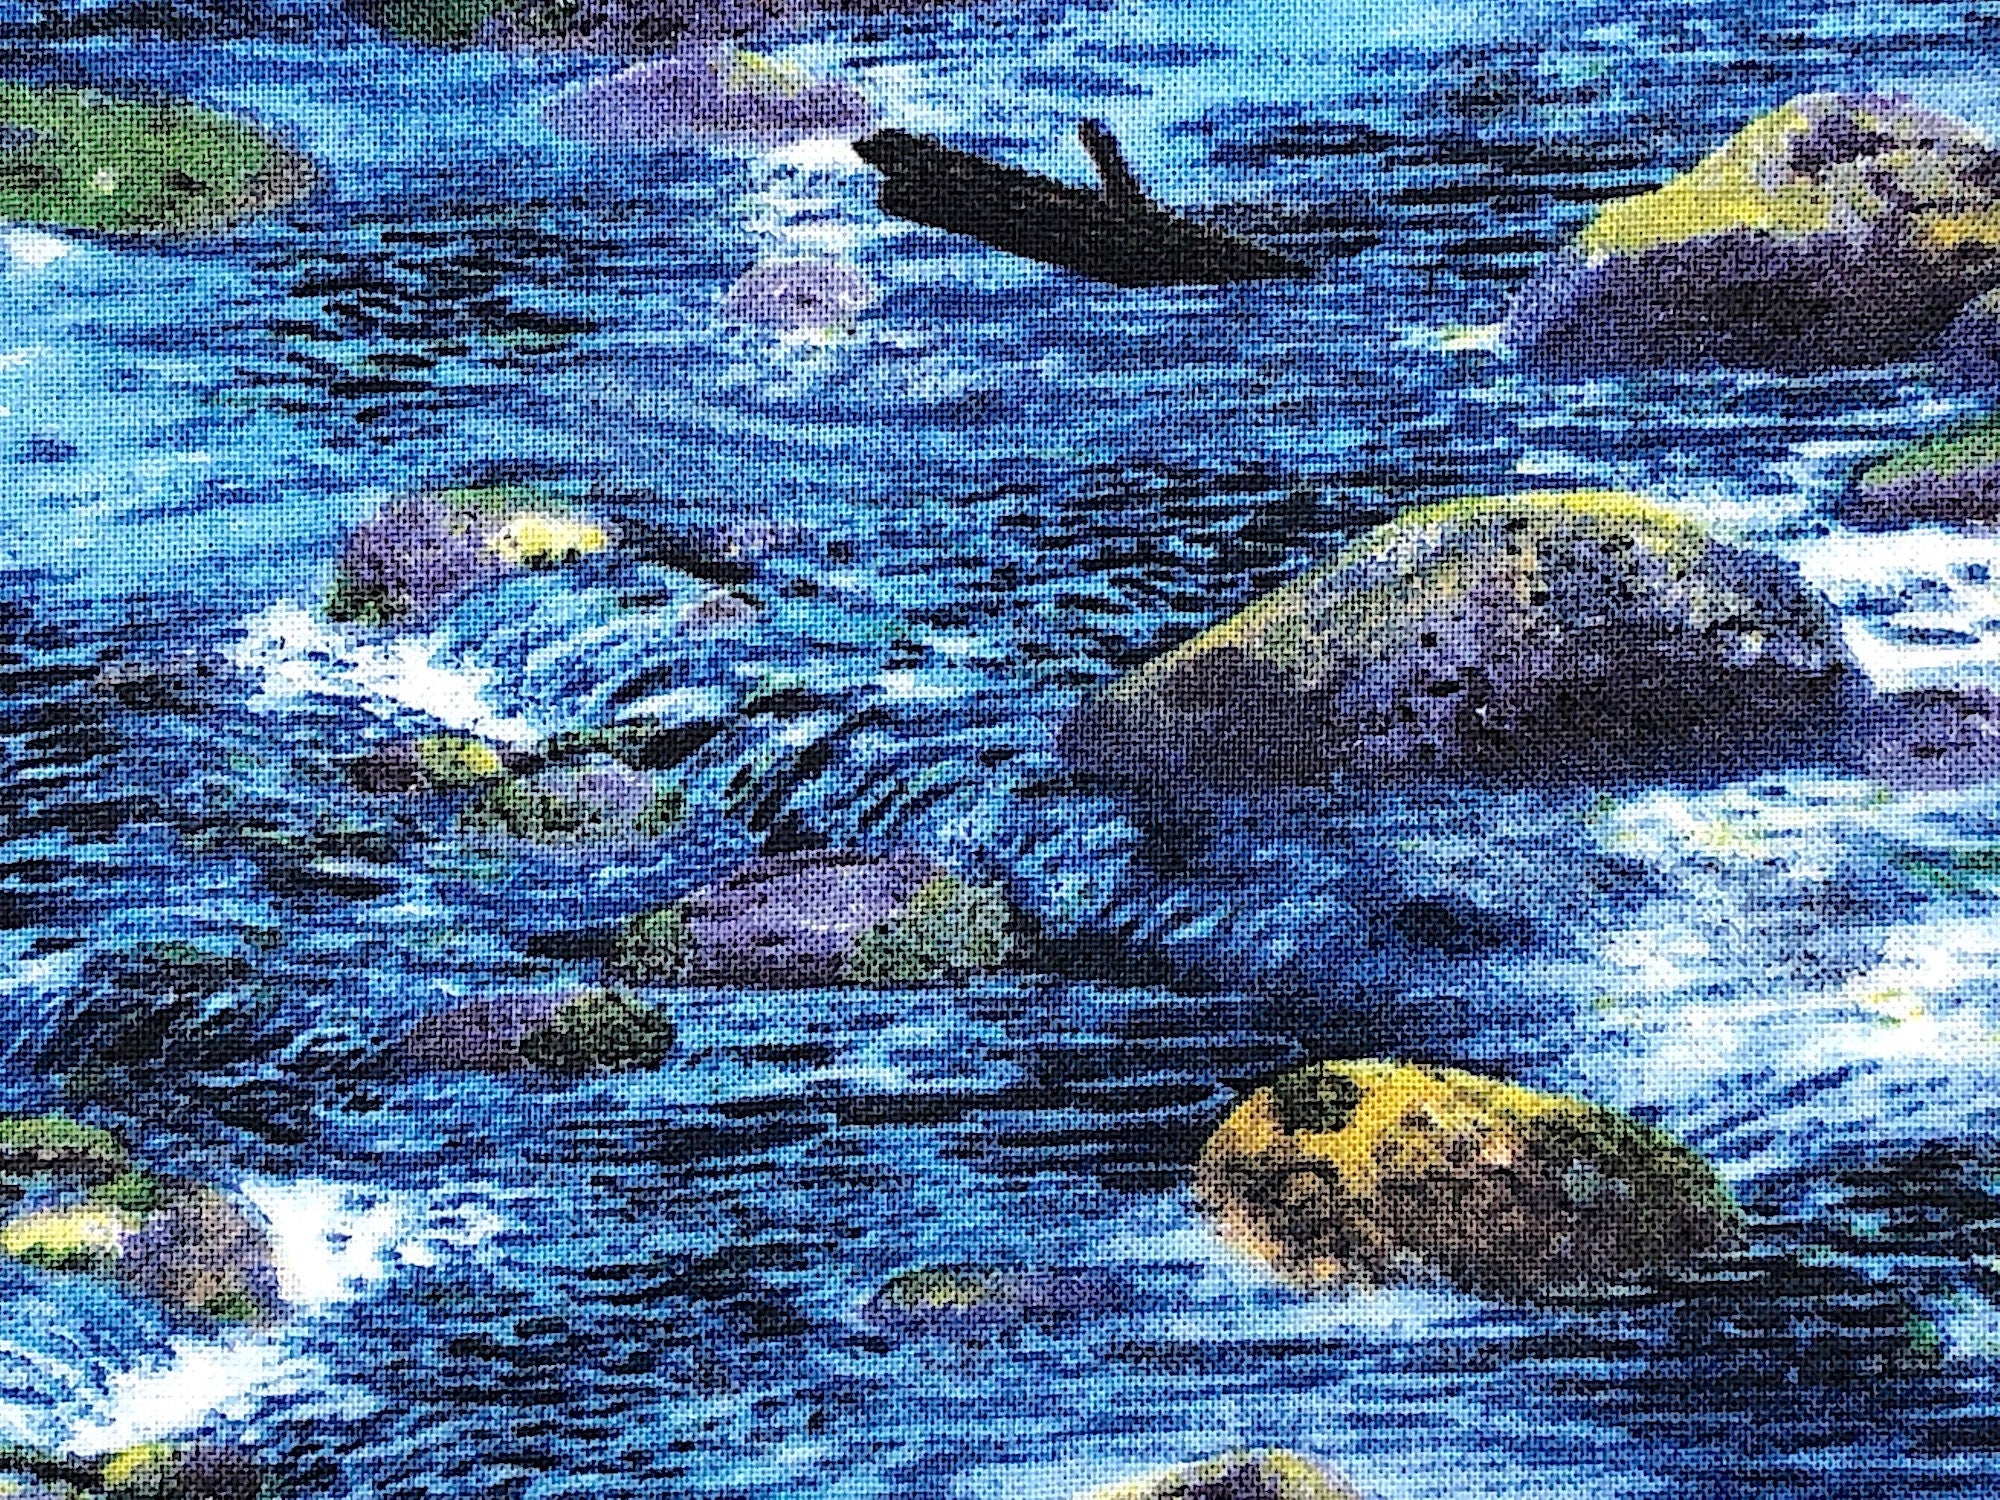 A river scene covers this fabric. There are moss covered rocks and sticks in this river fabric. The fabric is called A New Adventure.